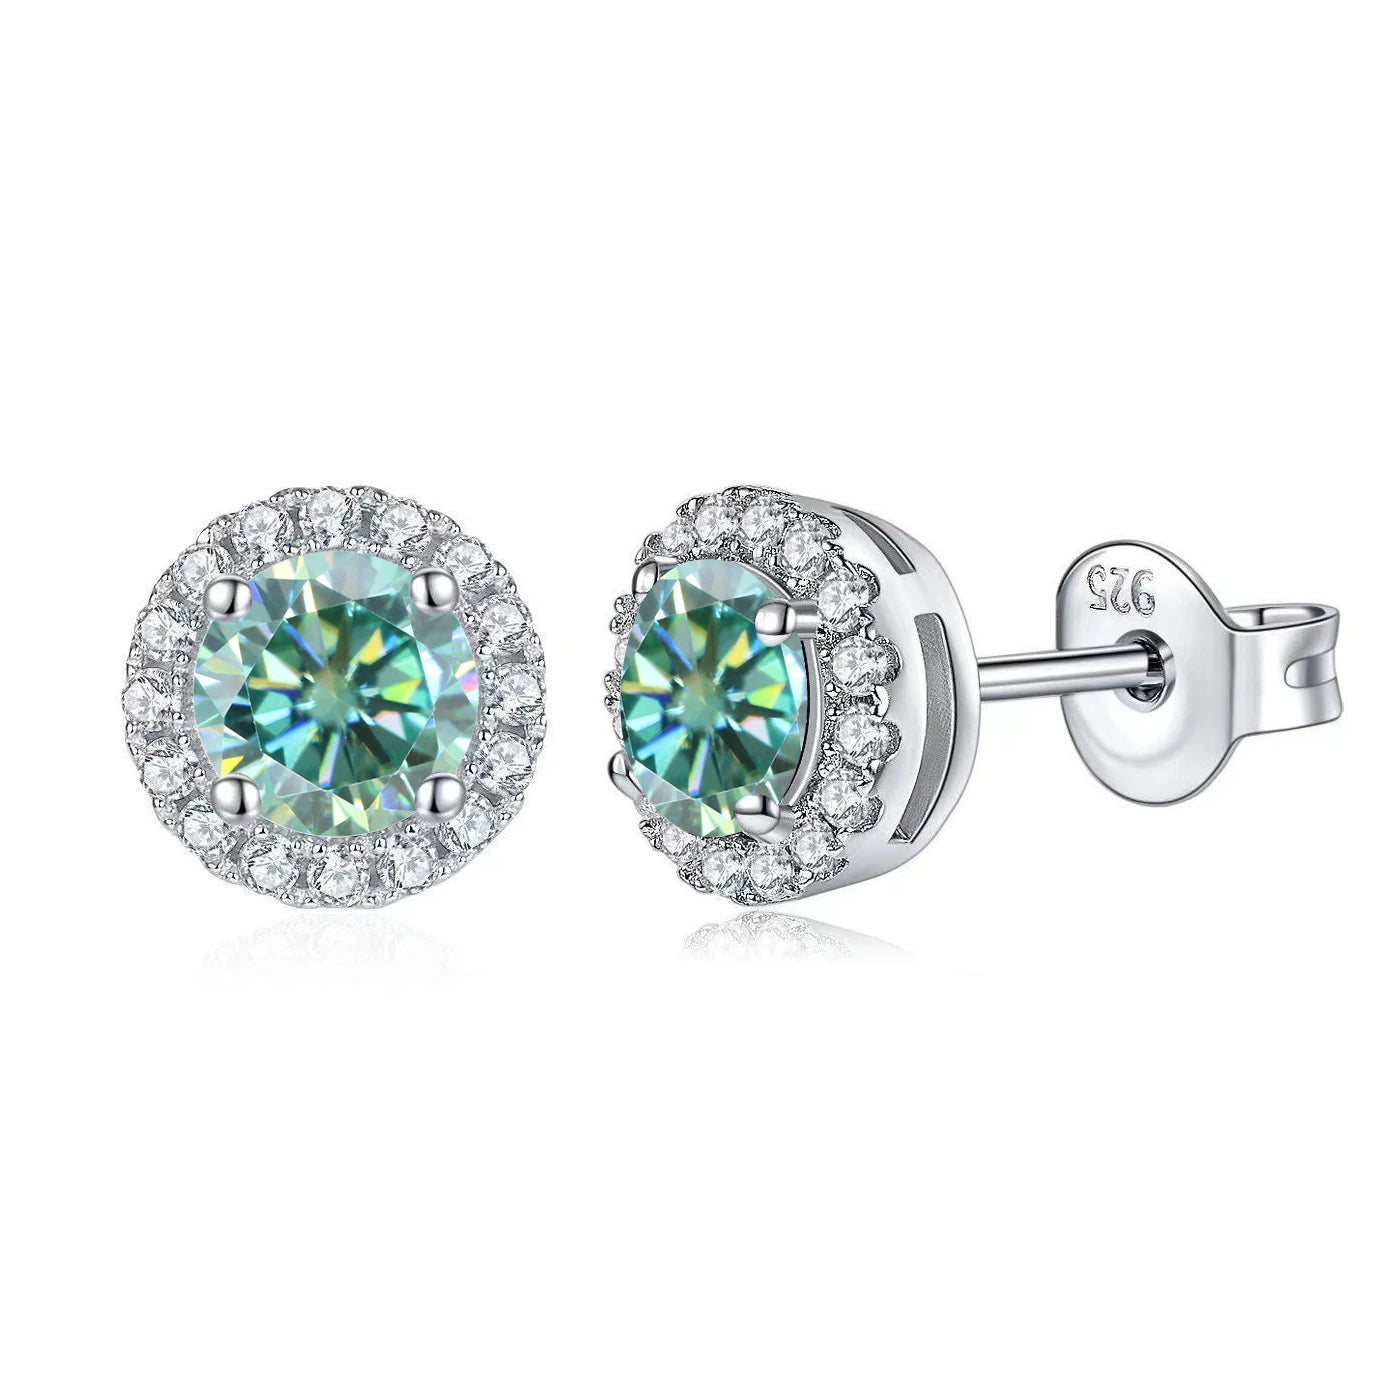 GEM'S BALLET 1.0CT Brilliant Round Classic Halo 925 Silver Moissanite Earring Studs Certified Moissanite Earrings Christmas Gift Green 925 Sterling Silver CHINA